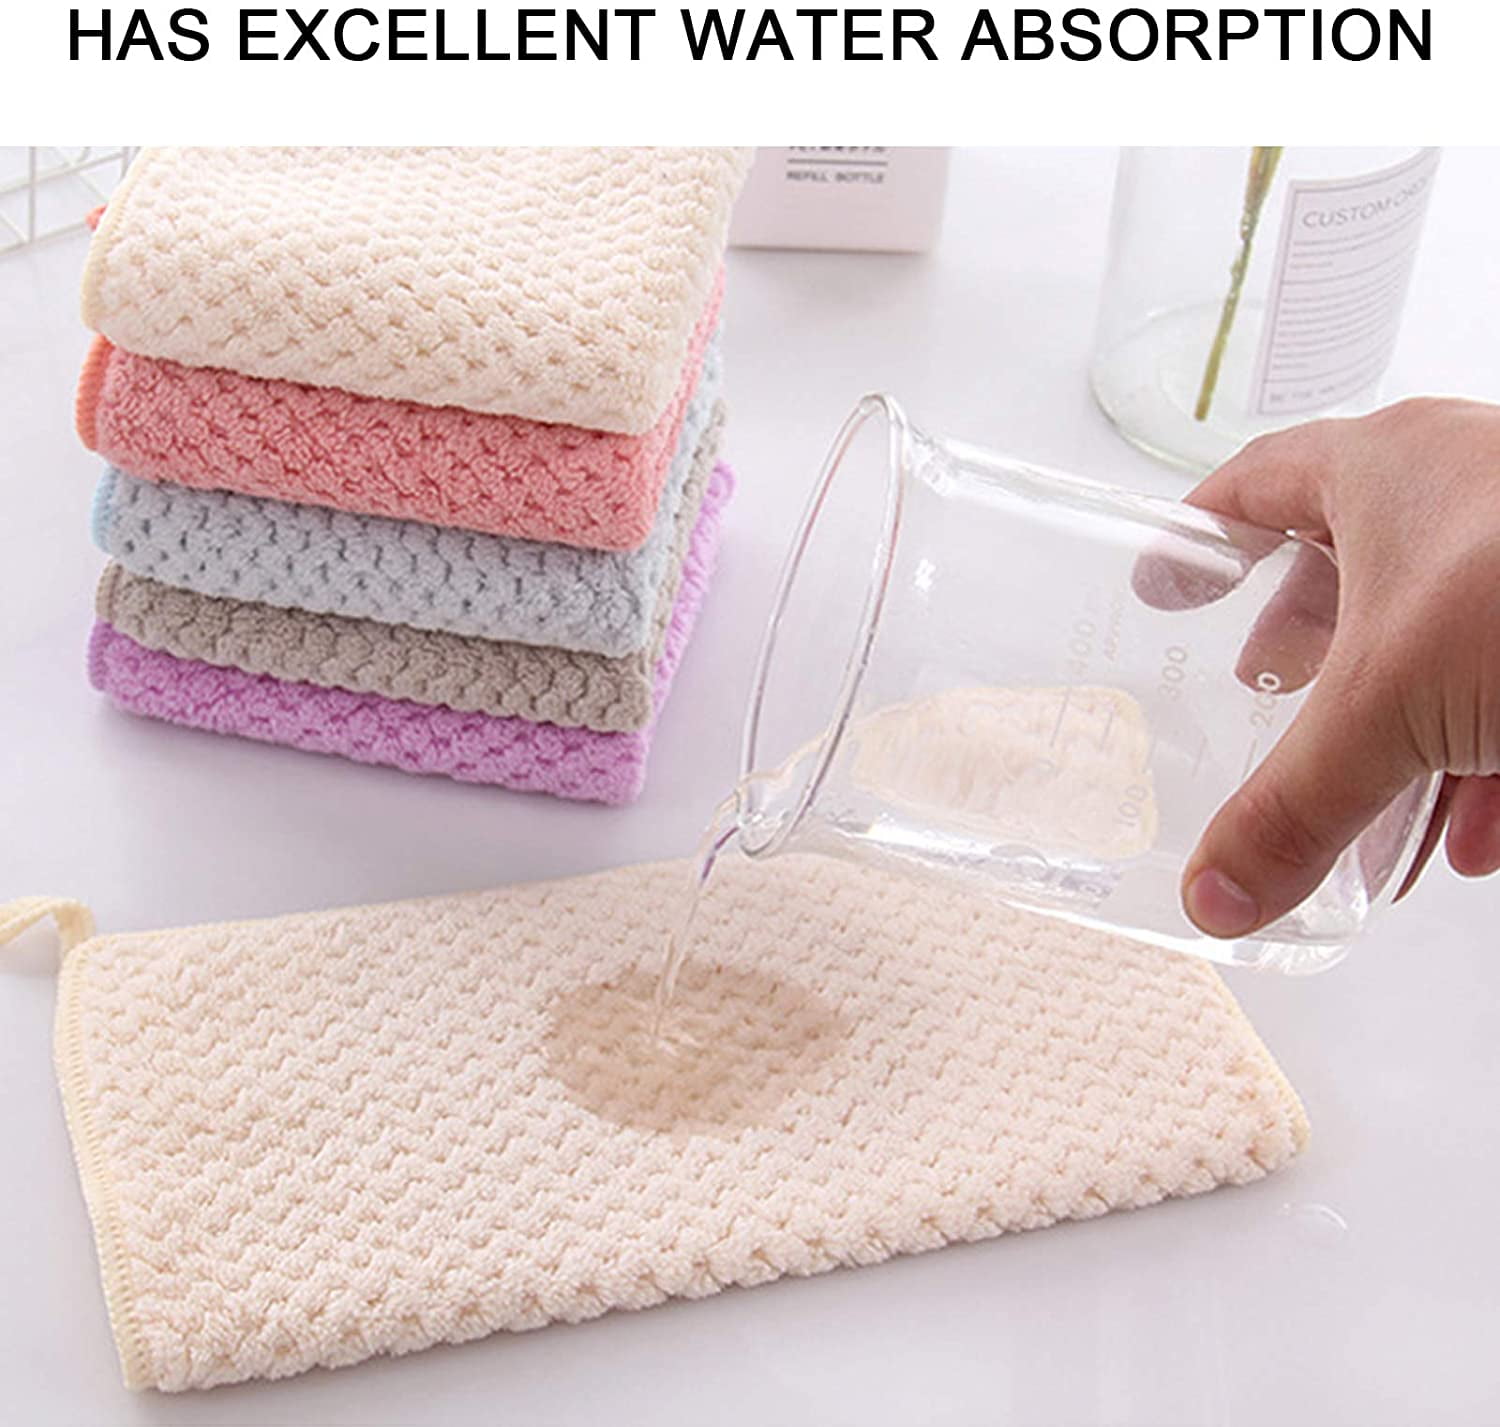  Hipruict Hand Towel with Hanging Loop, Set of 5 Hand Towels  with Hanging Loop.Strongly Absorbent Hand Towels in Soft Microfibre with a  Wheat Spike Pattern, Suitable for Kitchens and Bathrooms 